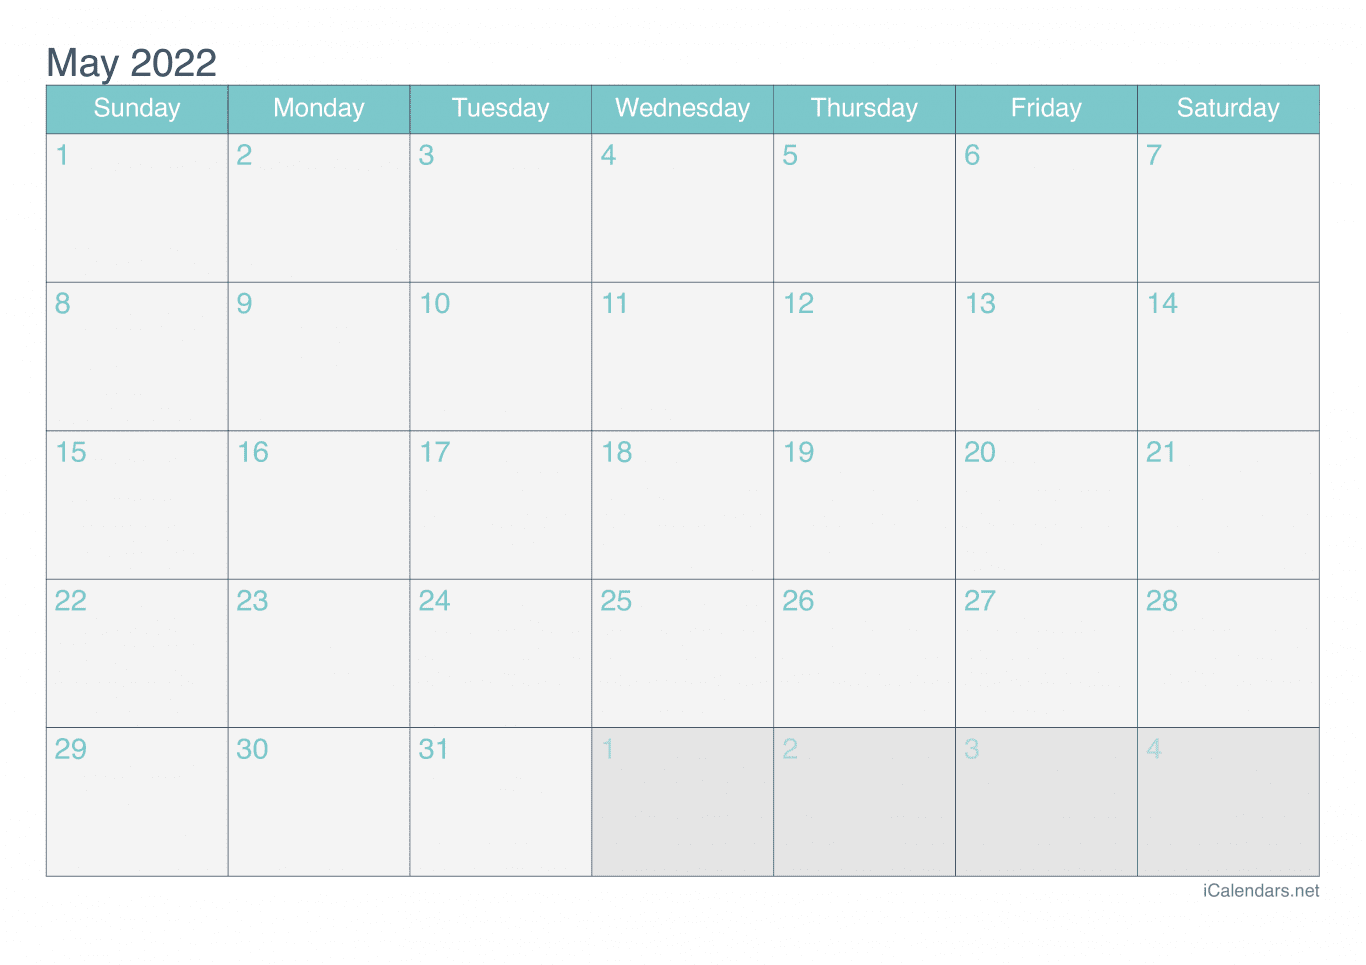 2022 May Calendar - Turquoise